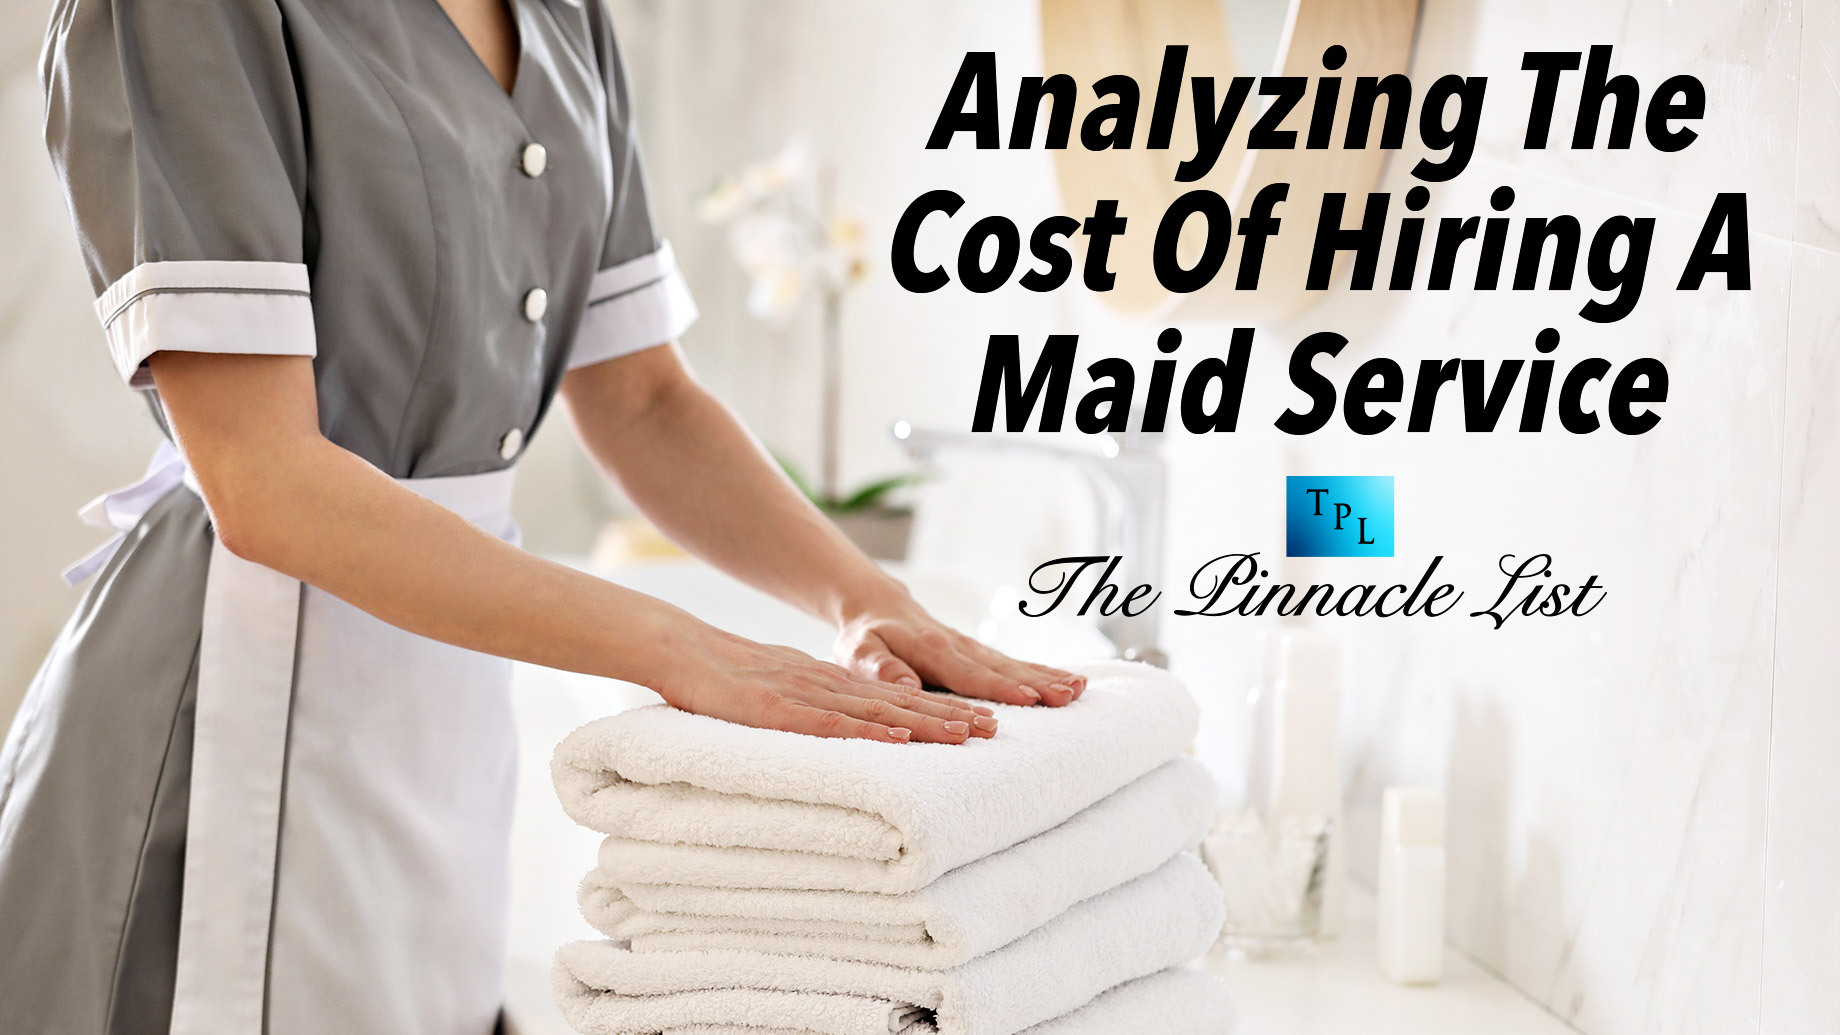 Analyzing The Cost Of Hiring A Maid Service